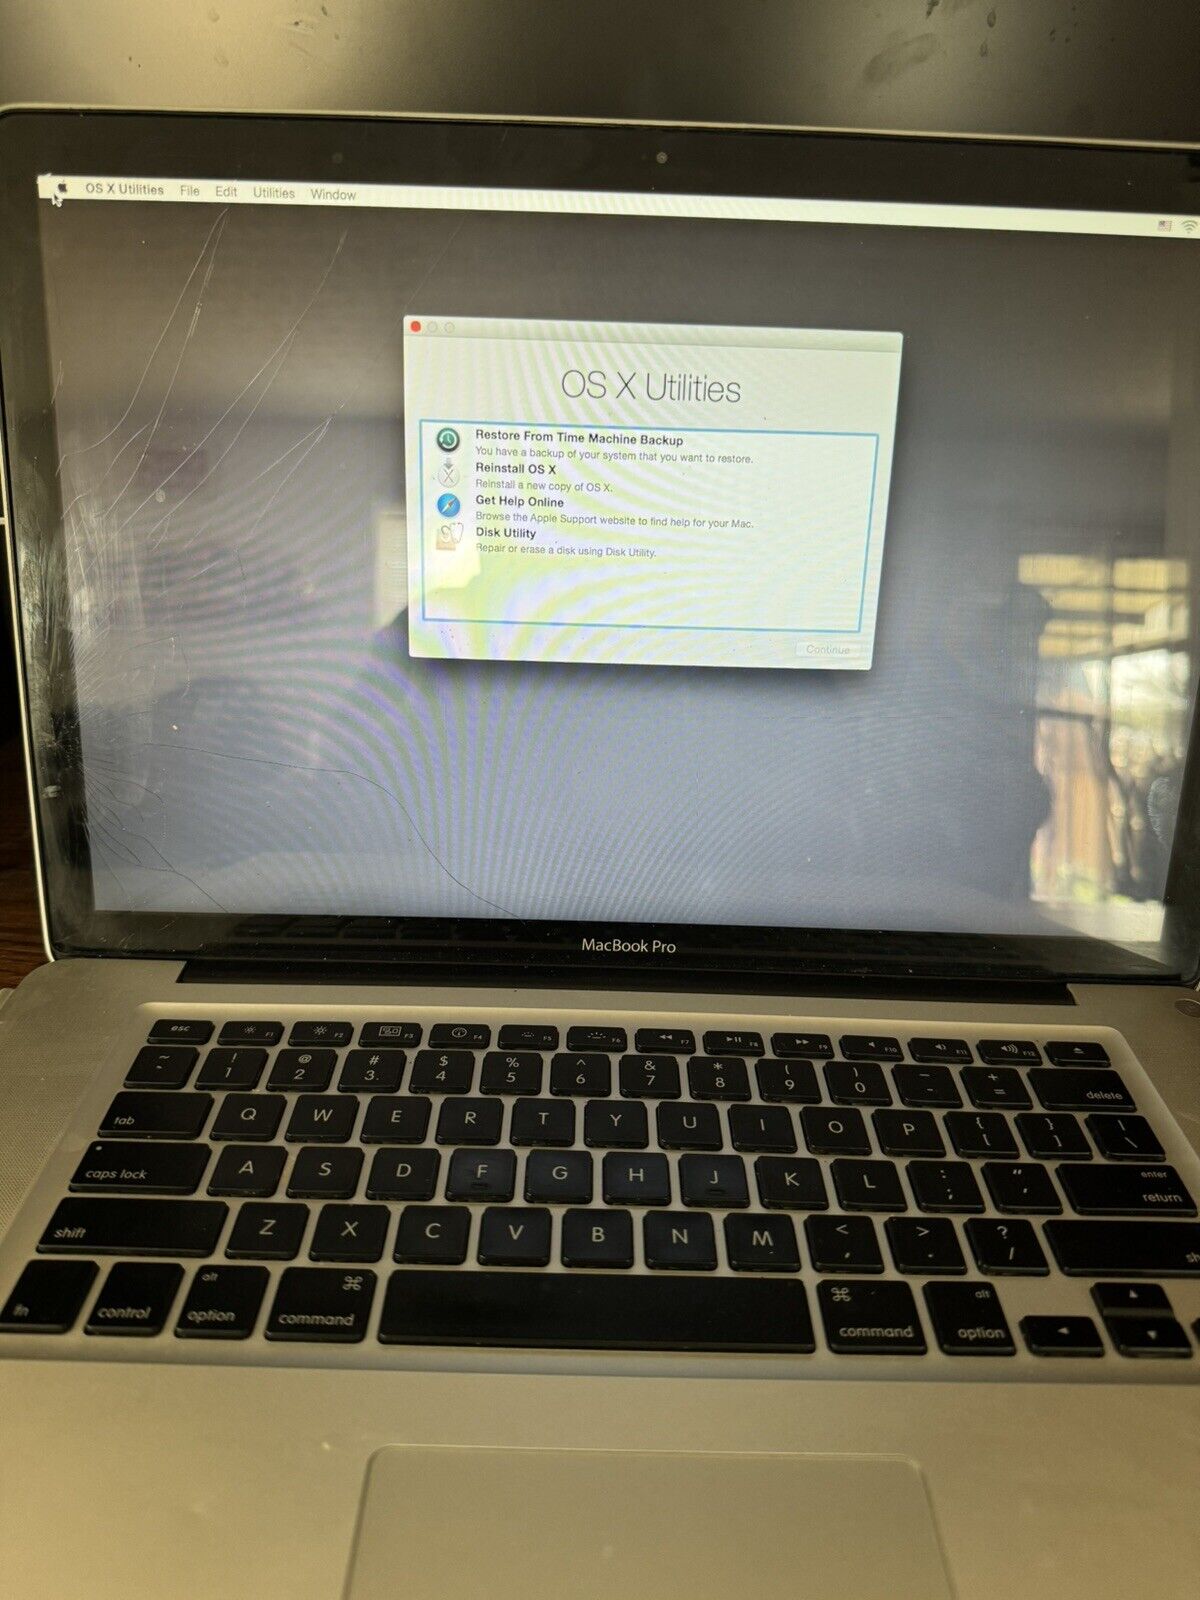 APPLE MACBOOK PRO 15” 2008 WORKS AND STUCK ON OS X YOSEMITE ***FOR PARTS ONLY***